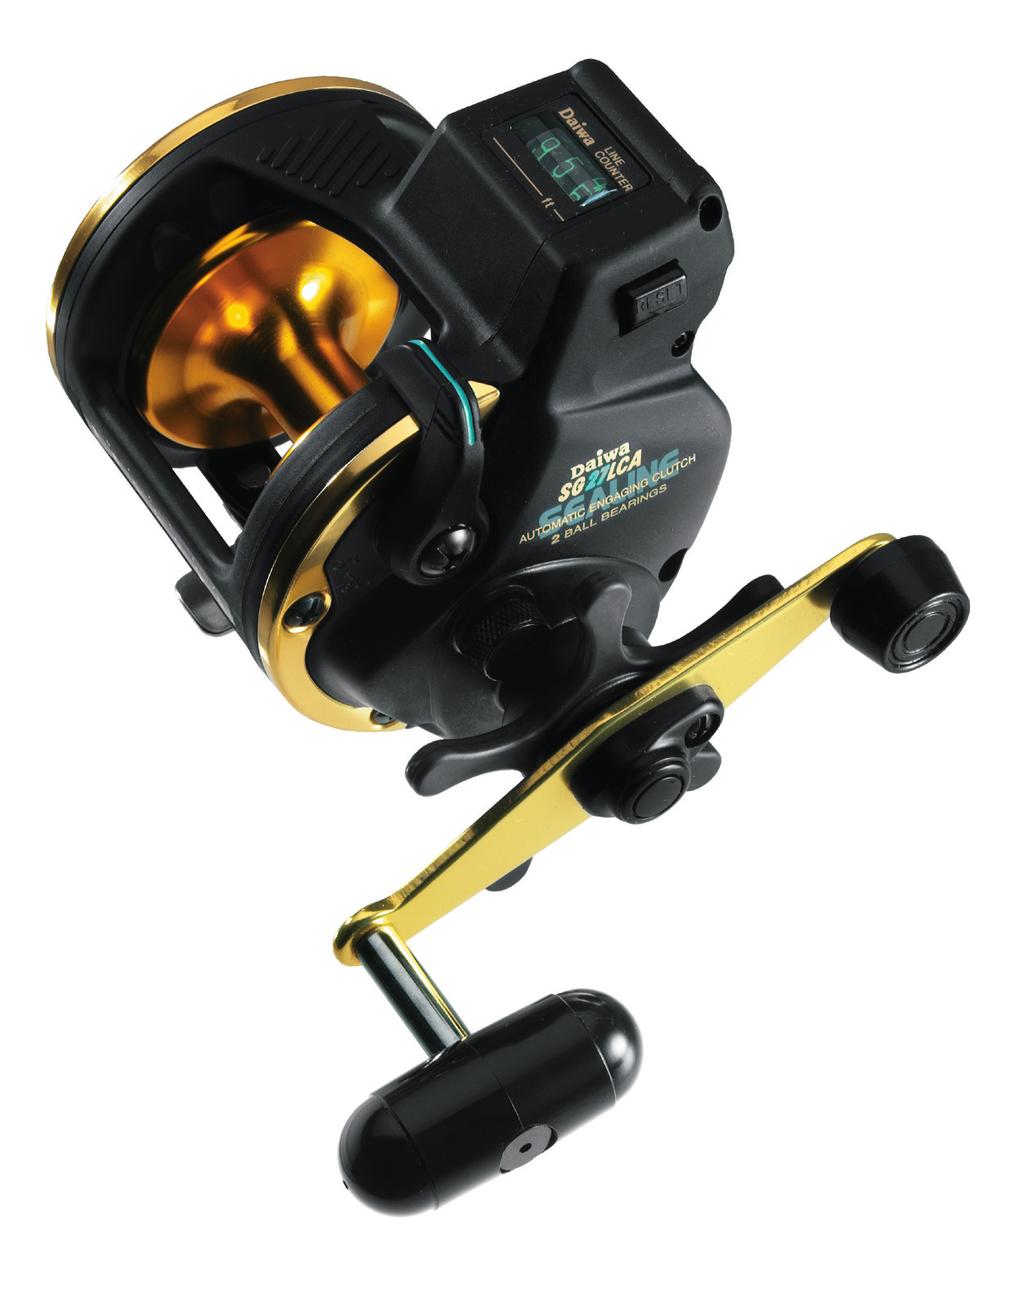 The high gear n makes fast winding of the lures from deep depth